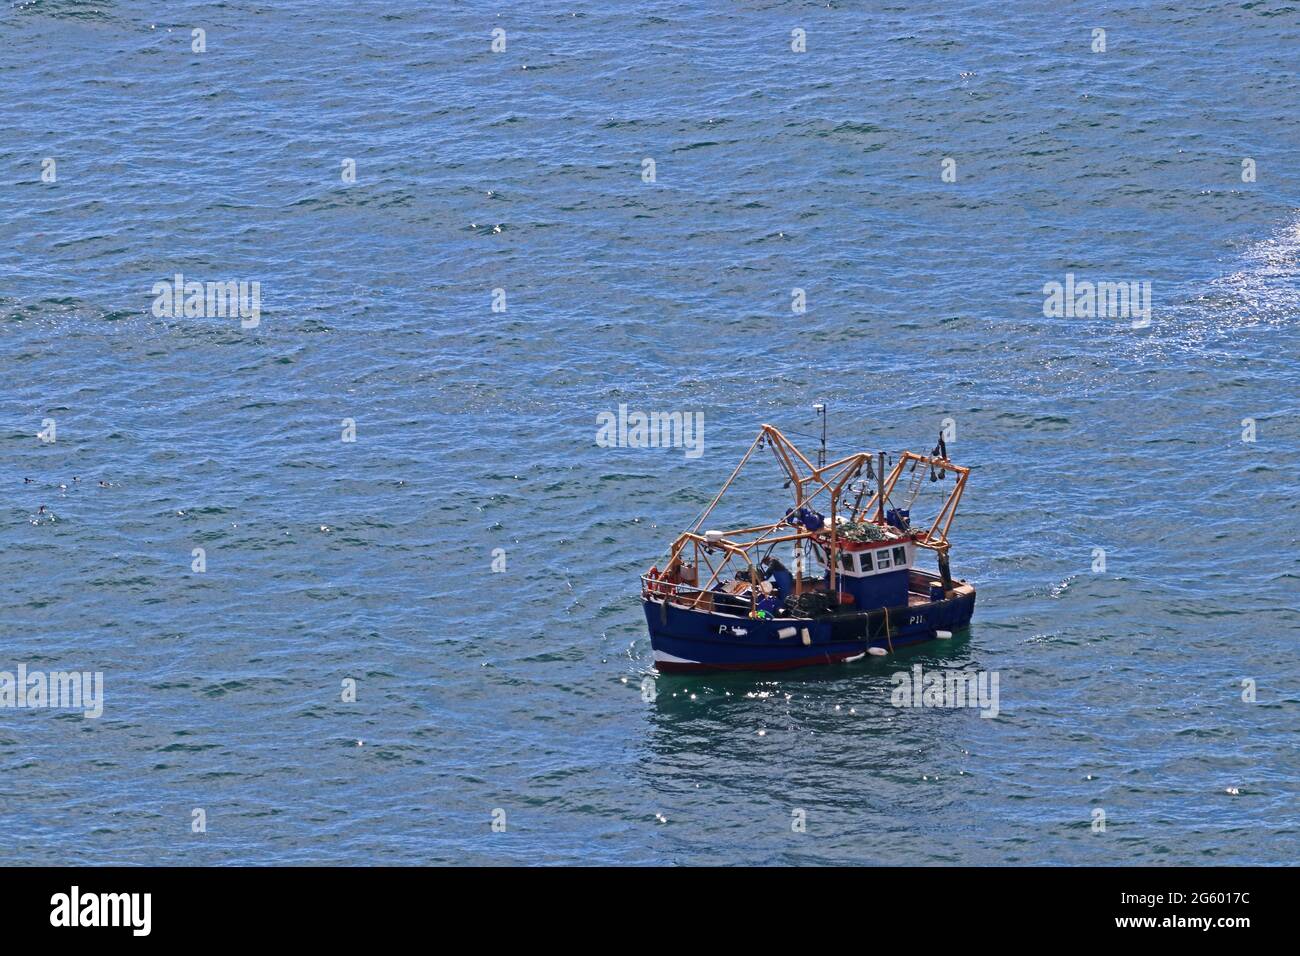 Fishing boat P11 'Ask Me' fishing off the coast of Anglesey, Wales Stock Photo